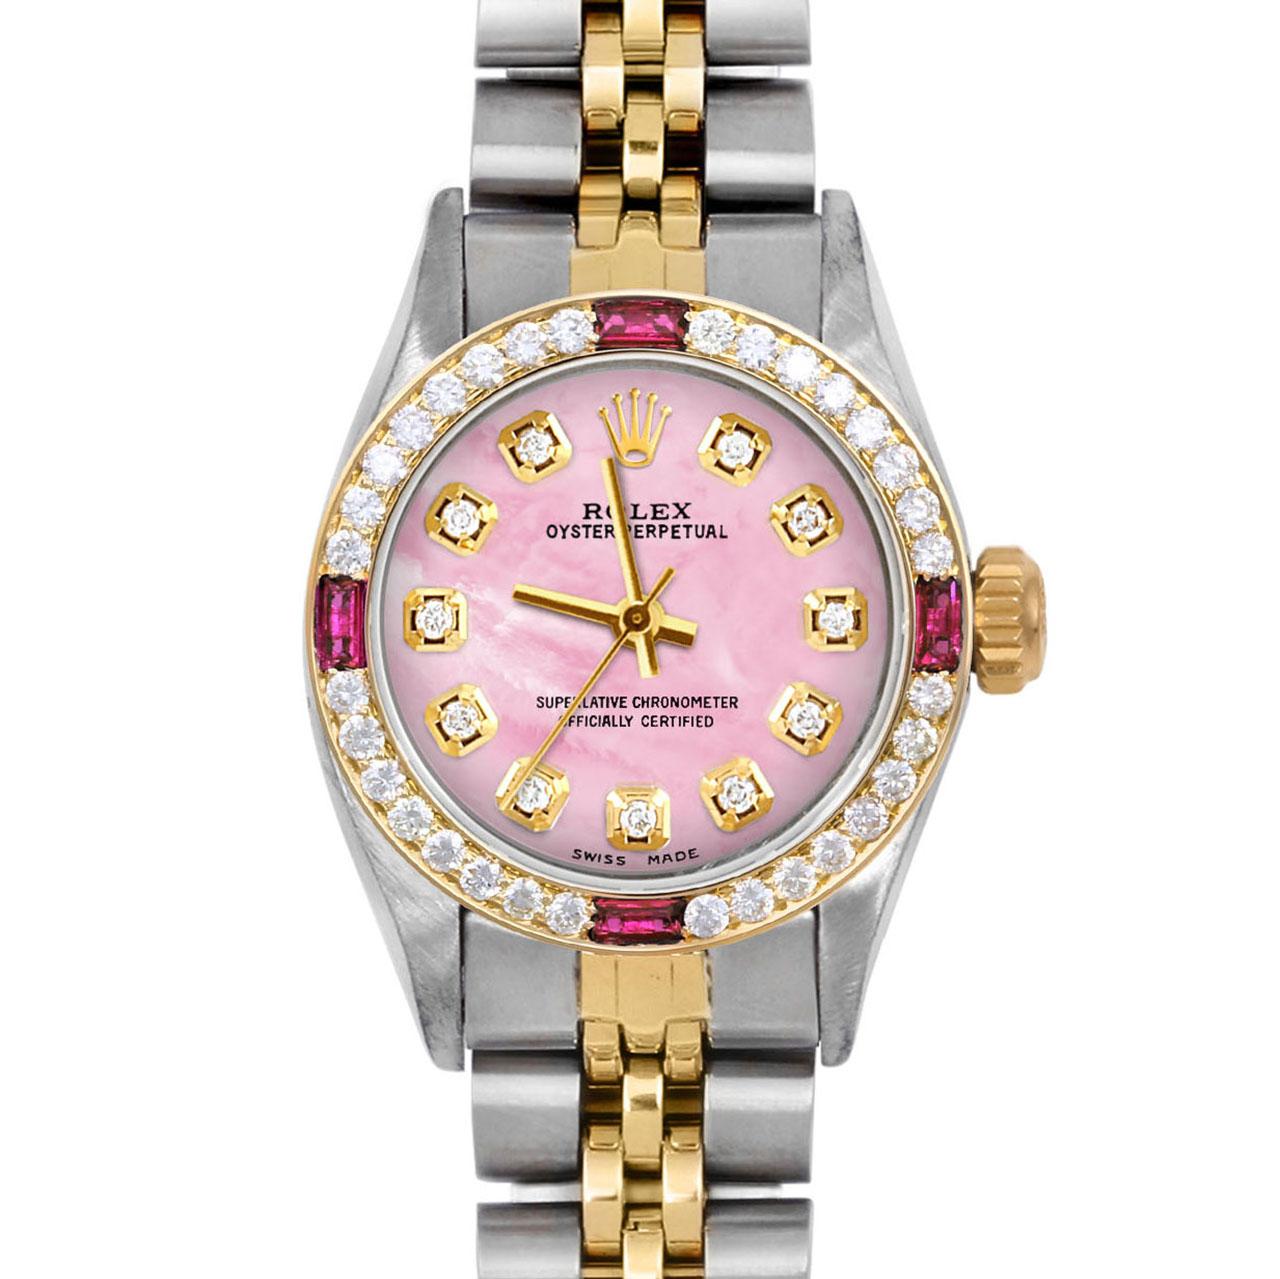 Brand : Rolex
Model : Oyster Perpetual 
Gender : Ladies
Metals : 14K Yellow Gold / Stainless Steel
Case Size : 24 mm
Dial : Custom Pink Mother Of Pearl Diamond Dial (This dial is not original Rolex And has been added aftermarket yet is a beautiful